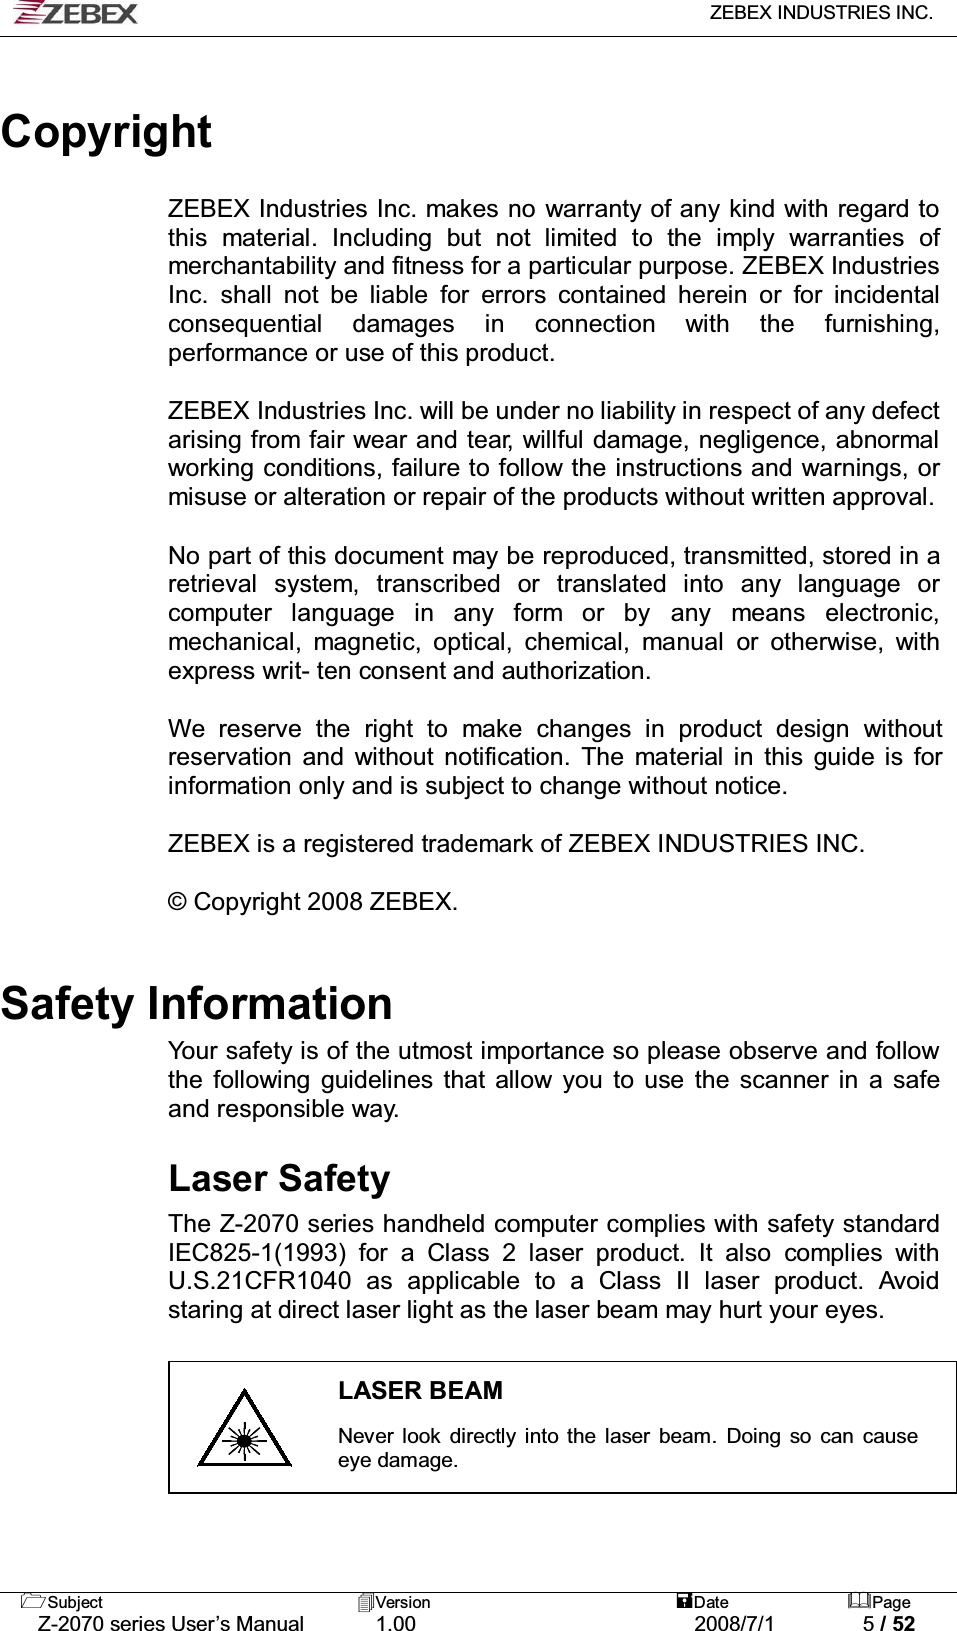   ZEBEX INDUSTRIES INC.   Subject Version  Date Page   Z-2070 series User’s Manual  1.00  2008/7/1  5 / 52   Copyright  ZEBEX Industries Inc. makes no warranty of any kind with regard to this material. Including but not limited to the imply warranties of merchantability and fitness for a particular purpose. ZEBEX Industries Inc. shall not be liable for errors contained herein or for incidental consequential damages in connection with the furnishing, performance or use of this product.  ZEBEX Industries Inc. will be under no liability in respect of any defect arising from fair wear and tear, willful damage, negligence, abnormal working conditions, failure to follow the instructions and warnings, or misuse or alteration or repair of the products without written approval.  No part of this document may be reproduced, transmitted, stored in a retrieval system, transcribed or translated into any language or computer language in any form or by any means electronic, mechanical, magnetic, optical, chemical, manual or otherwise, with express writ- ten consent and authorization.  We reserve the right to make changes in product design without reservation and without notification. The material in this guide is for information only and is subject to change without notice.  ZEBEX is a registered trademark of ZEBEX INDUSTRIES INC.  © Copyright 2008 ZEBEX.    Safety Information Your safety is of the utmost importance so please observe and follow the following guidelines that allow you to use the scanner in a safe and responsible way.   Laser Safety The Z-2070 series handheld computer complies with safety standard IEC825-1(1993) for a Class 2 laser product. It also complies with U.S.21CFR1040 as applicable to a Class II laser product. Avoid staring at direct laser light as the laser beam may hurt your eyes.   LASER BEAM  Never look directly into the laser beam. Doing so can cause eye damage.    